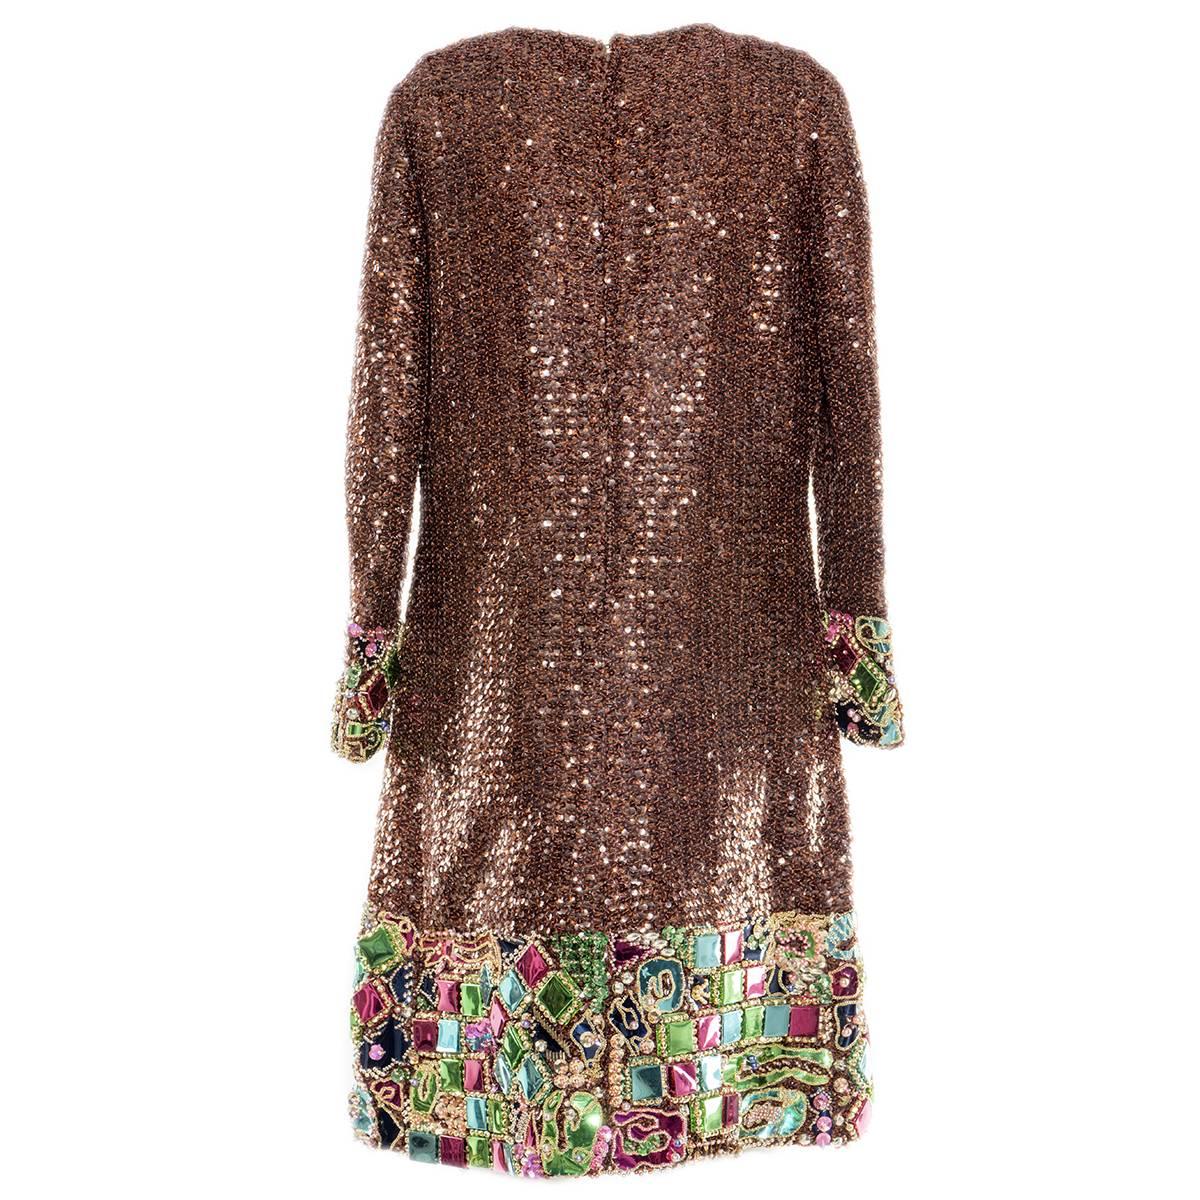 Fantastic cocktail dress made by italian tailoring
Teresa Bernardelli, Bologna
Completely covered by brown sequins
Multicolored inserts at the end of the dress
Medium size (US 8/10)
Made in Italy
Worldwide express shipping included in the